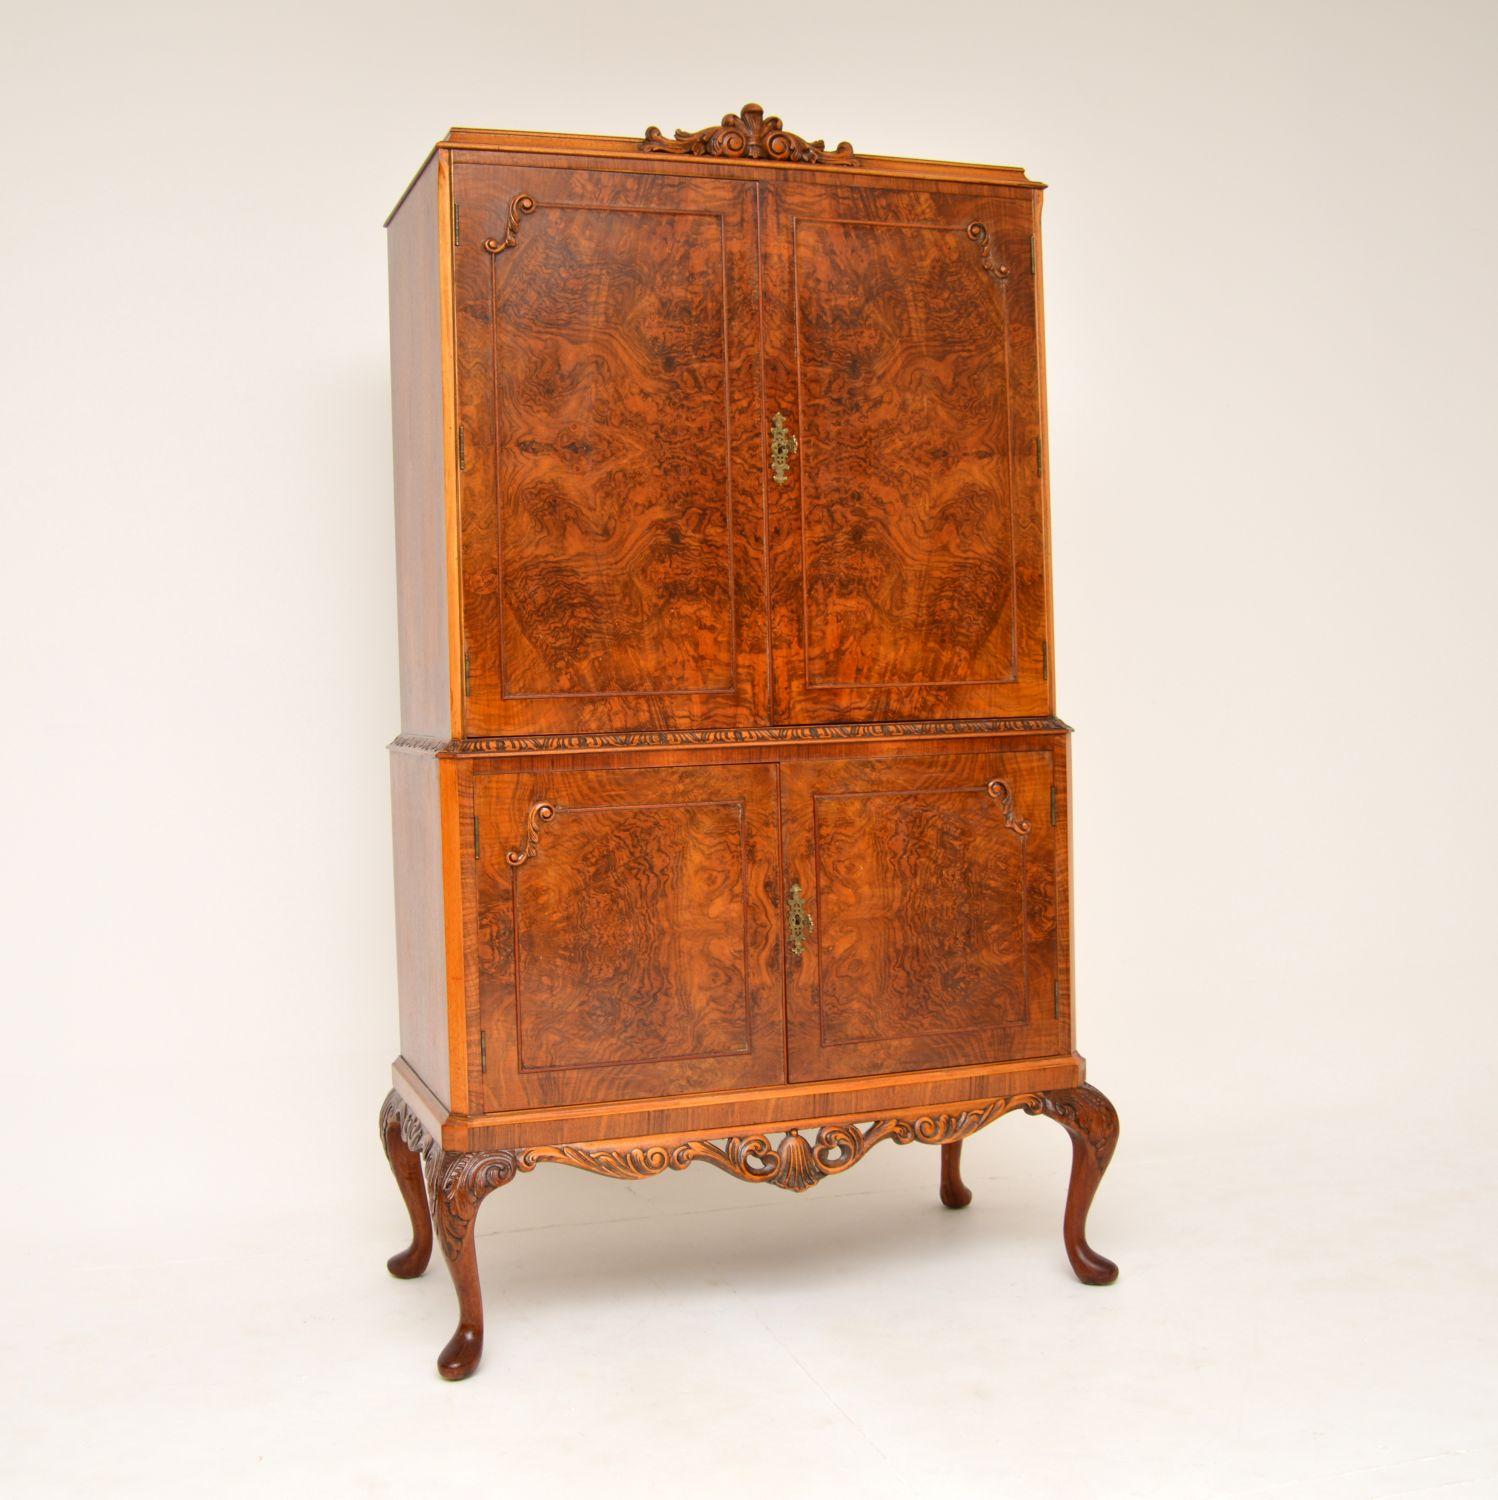 A beautiful antique burr walnut cocktail drinks cabinet in the Queen Anne style. This was made in England, it dates from around the 1930’s. It is of superb quality, with absolutely gorgeous grain patterns and wonderful carving. The upper cabinet is